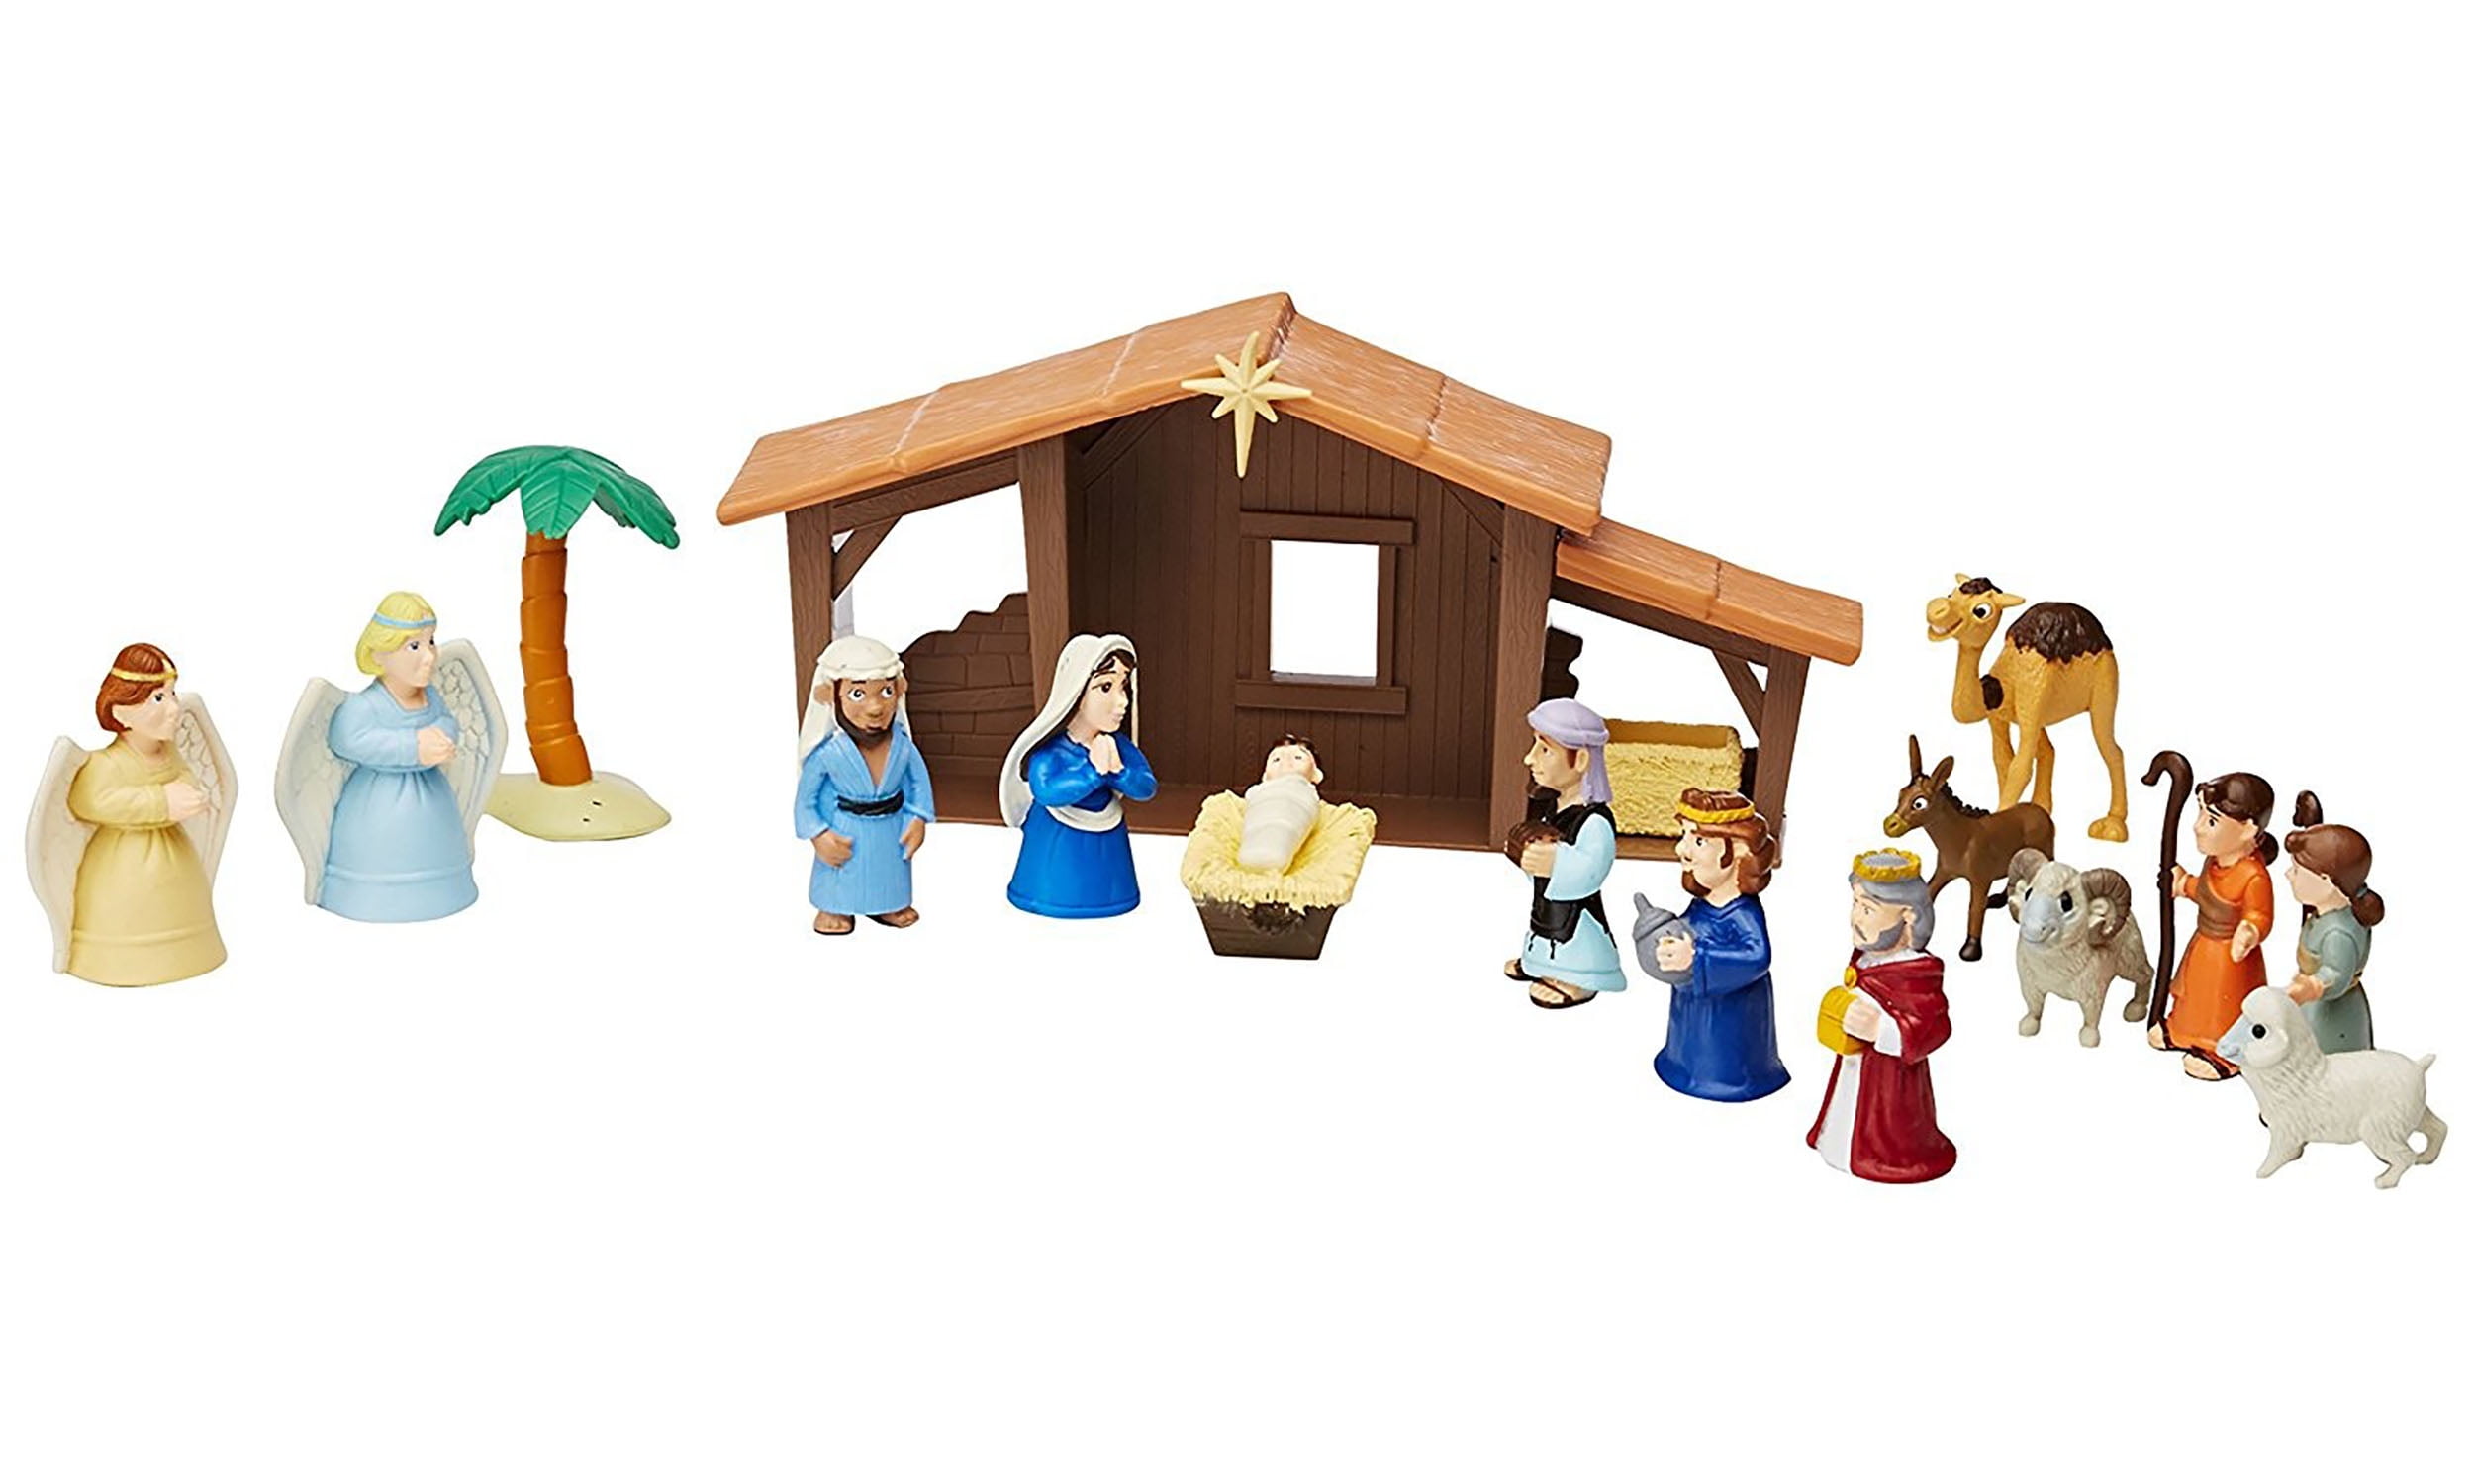 AllYourNeed 14 pieces Jesus and Friends Wood Play Set